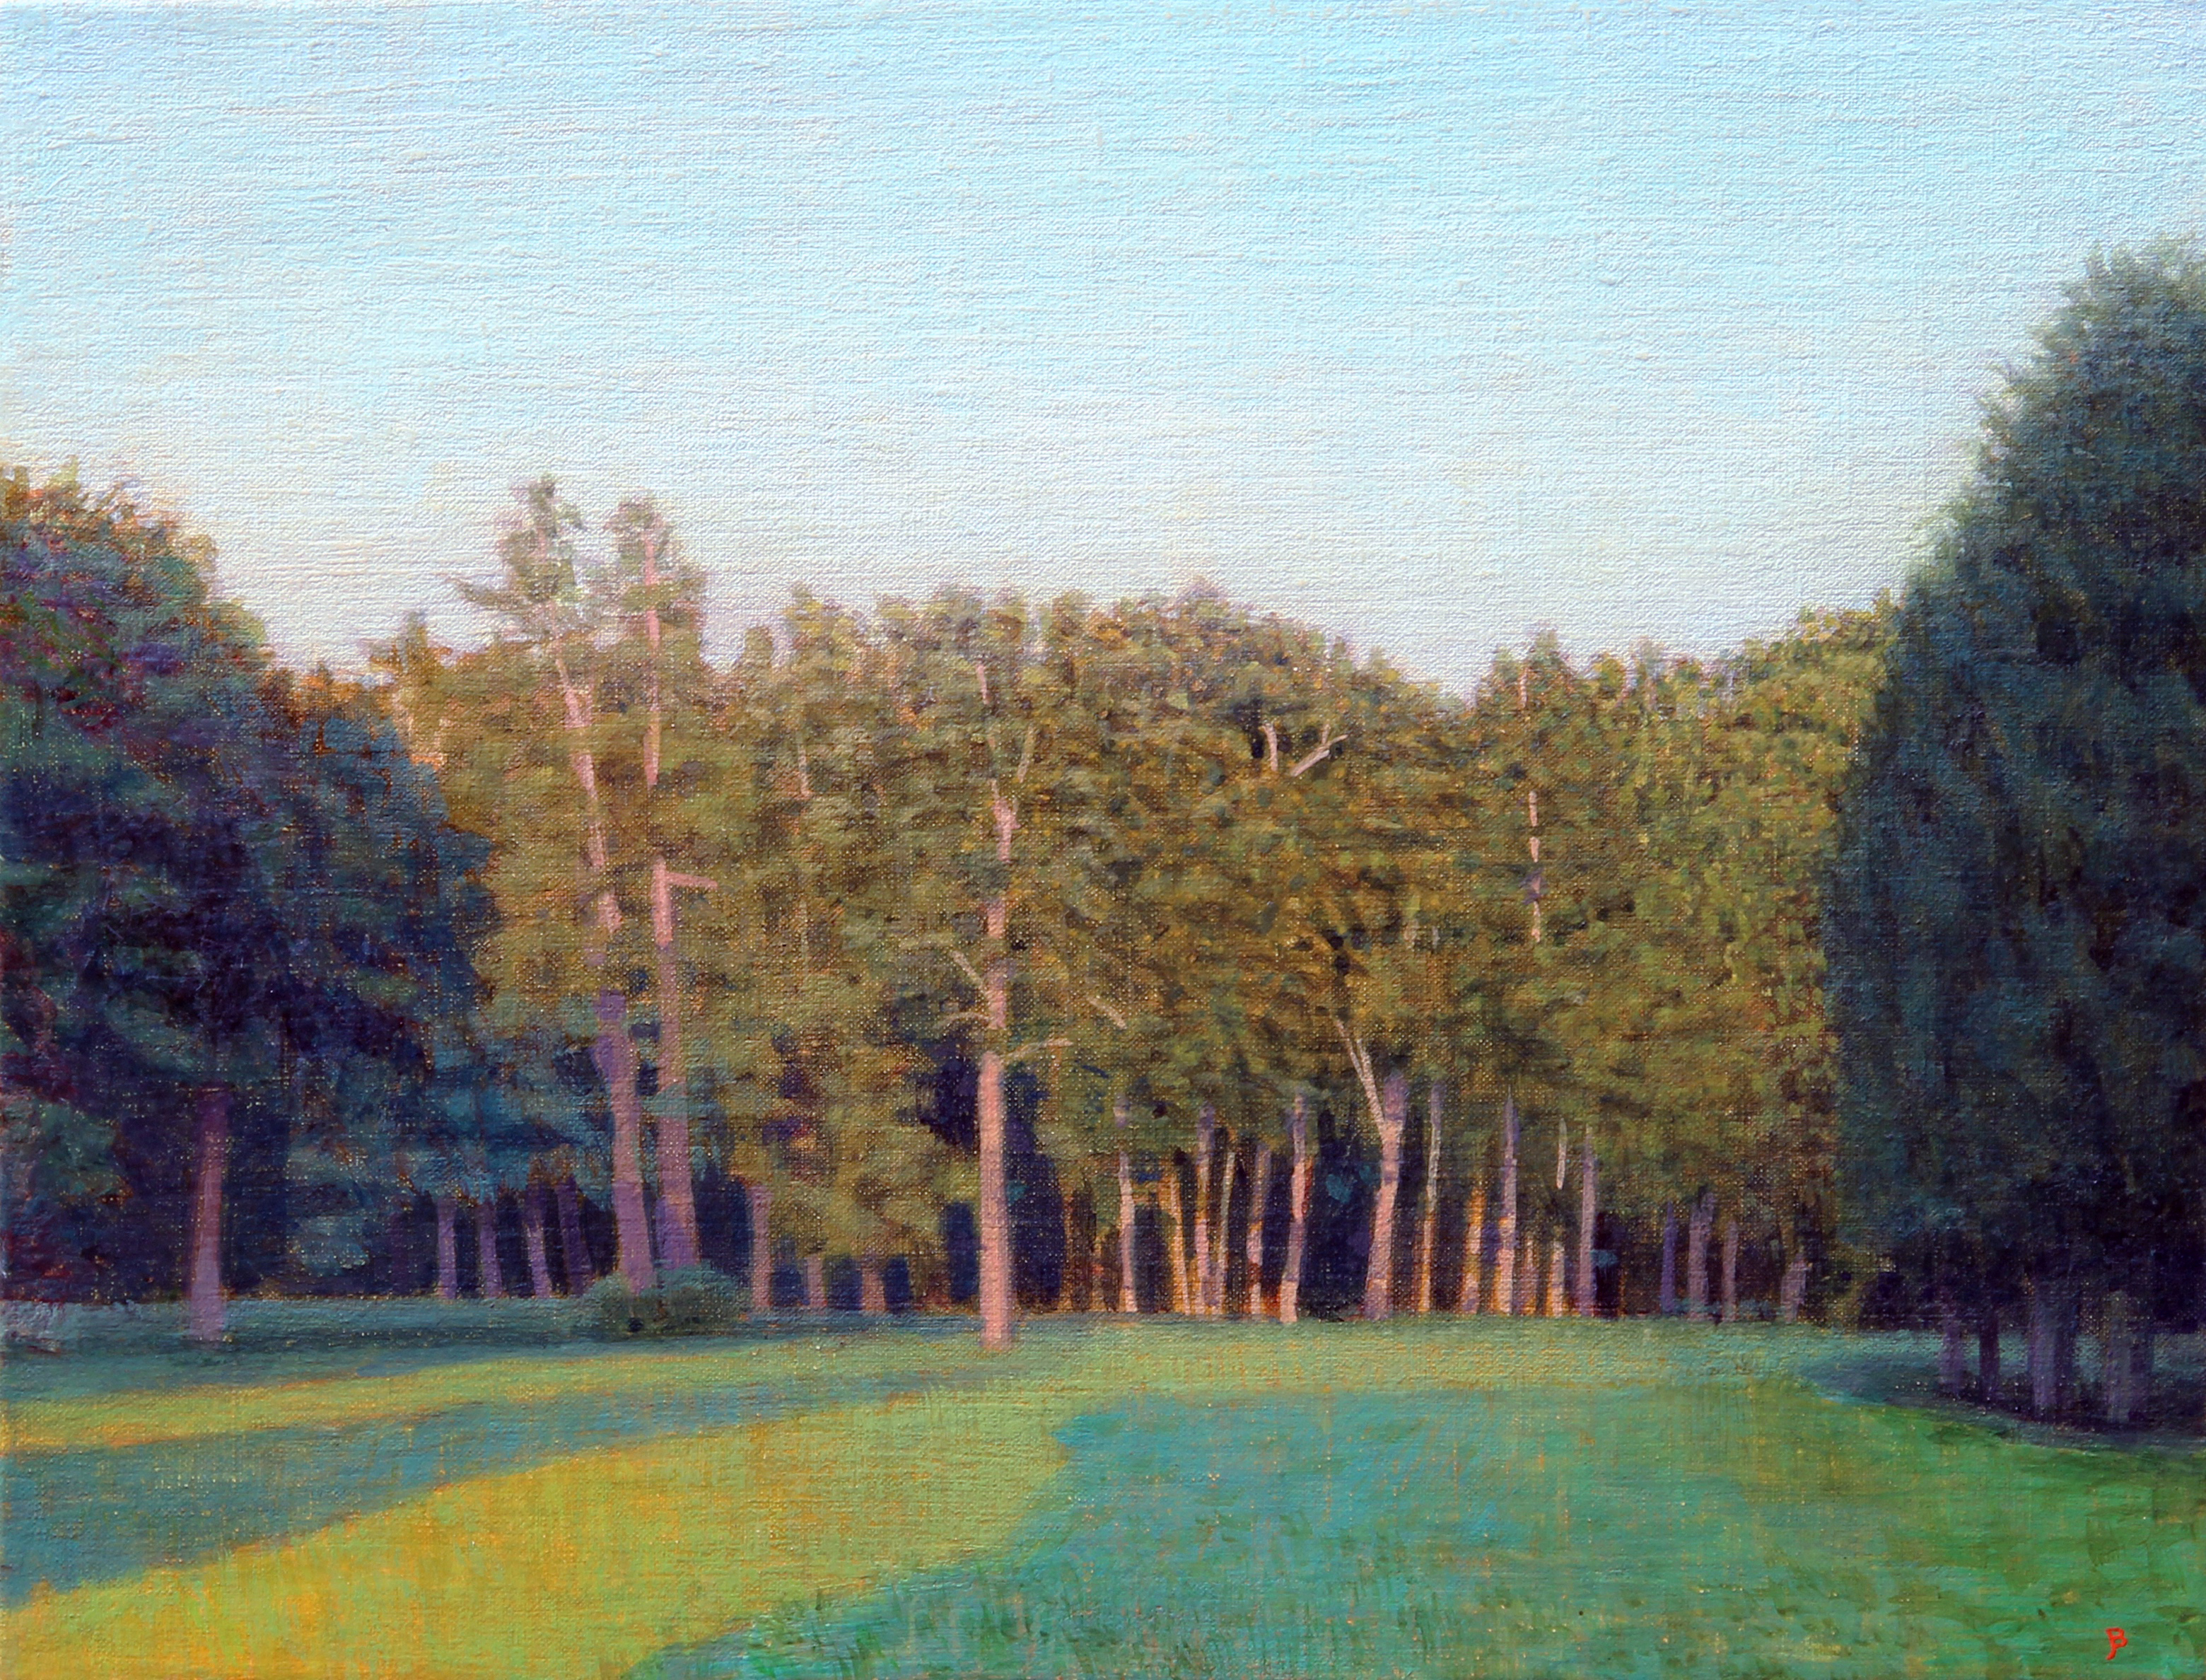 Southfield #2, Summer Morning Looking West, Oil and egg tempera on linen, 10 x 13 by John Beerman at Craven Allen Gallery